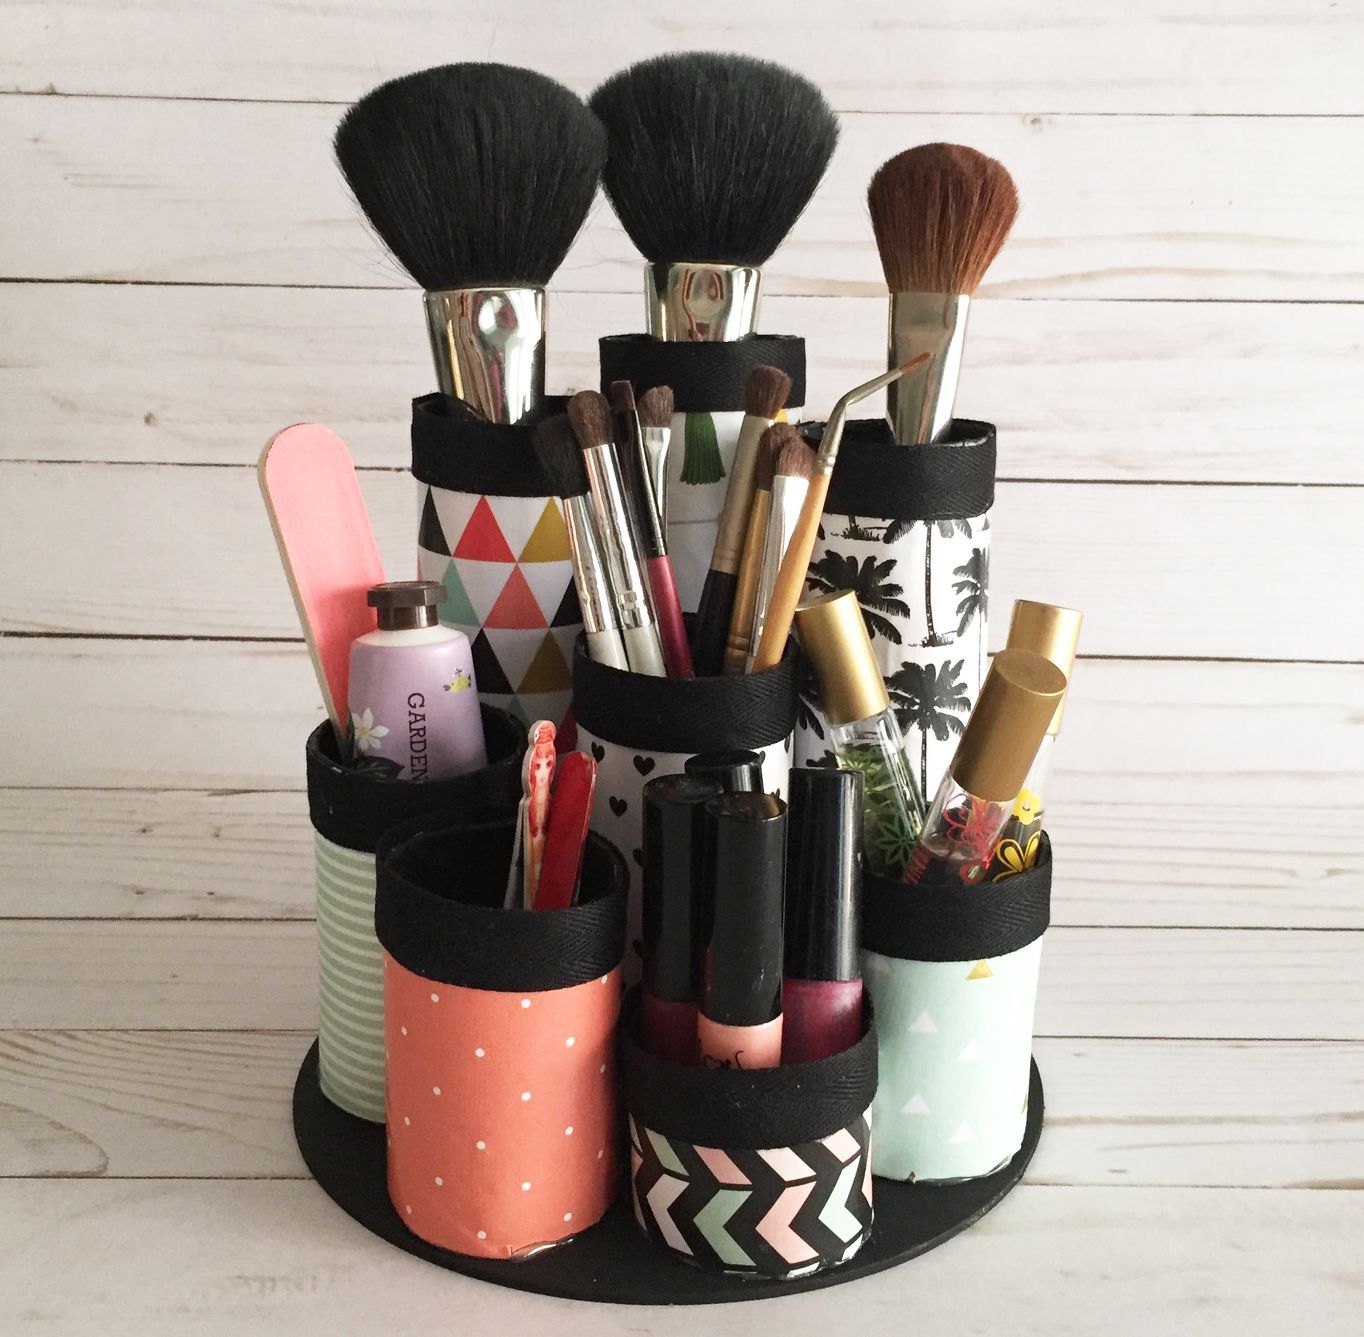 DIY Makeup Organizer. Made from recycled paper towel tubes. Perfect for makeup brushes and lipstick. Video How To.